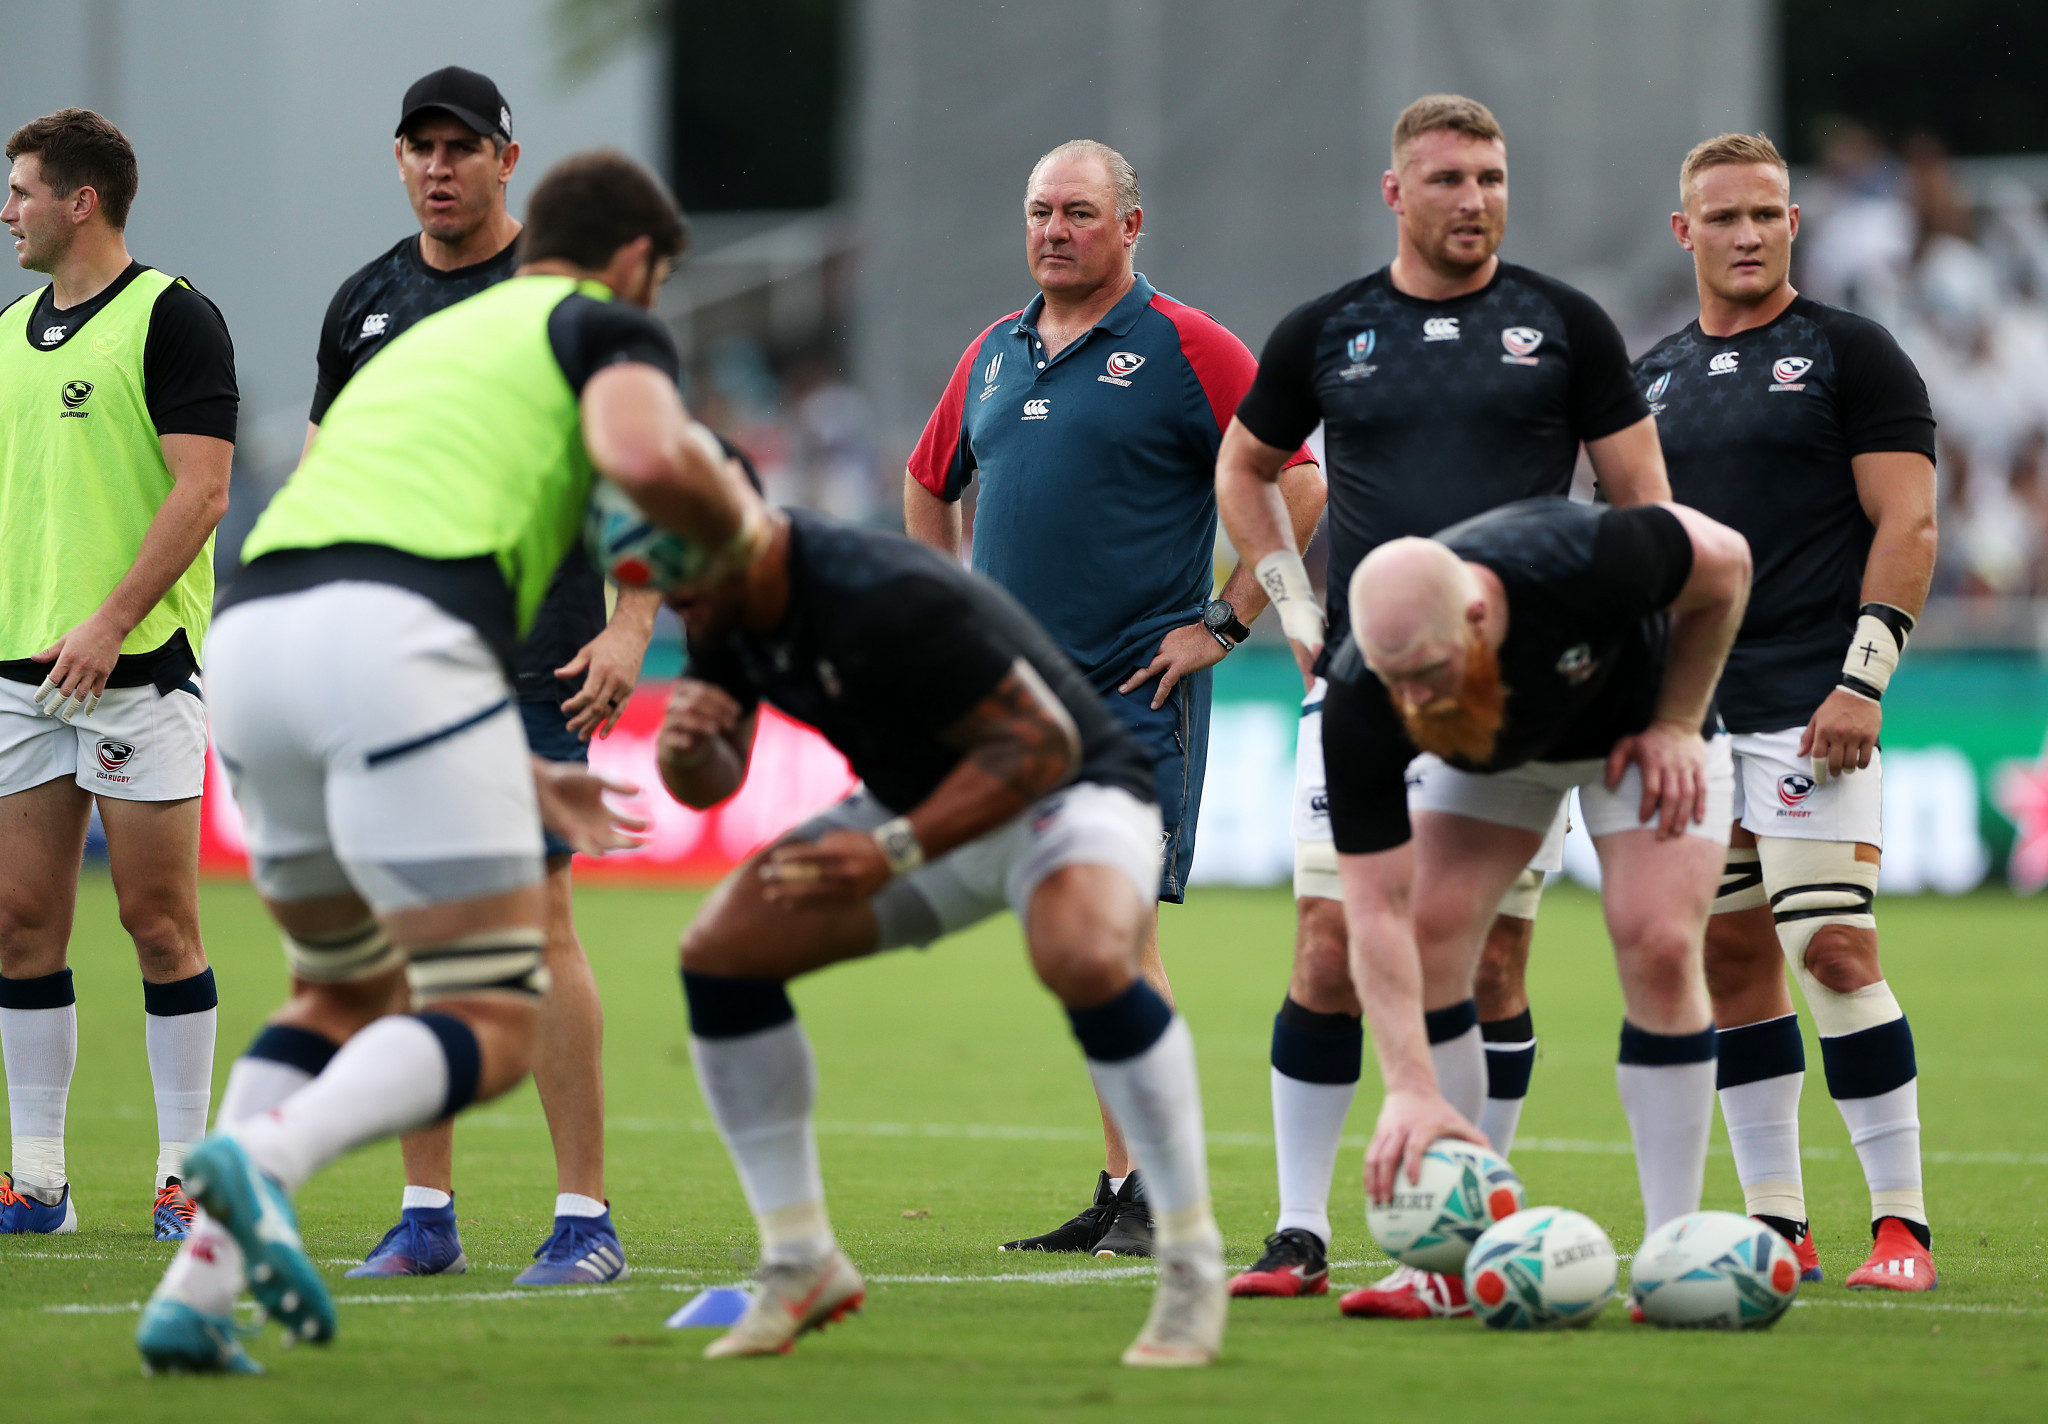 United States rugby coach says they can emulate hosts Japan